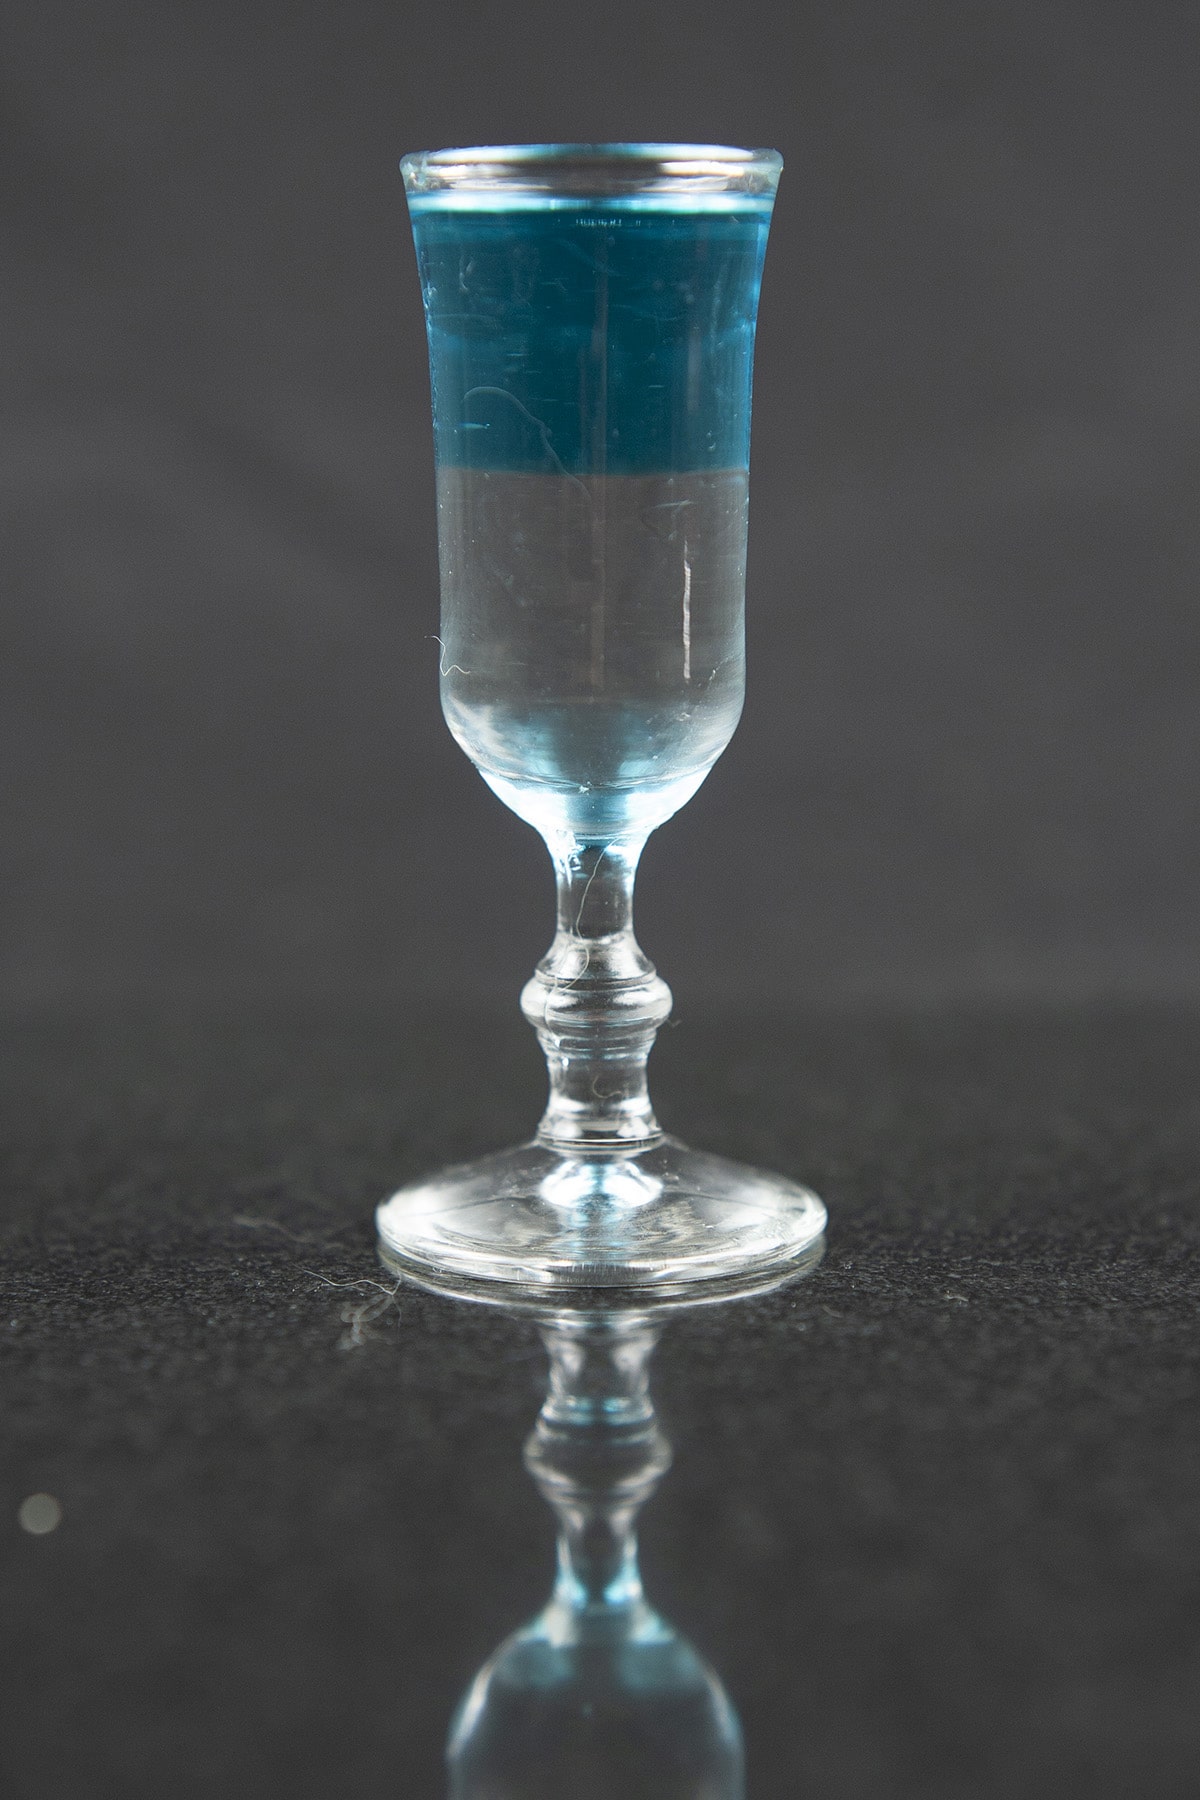 A clear and light blue layered shooter in a stemmed shot glass.